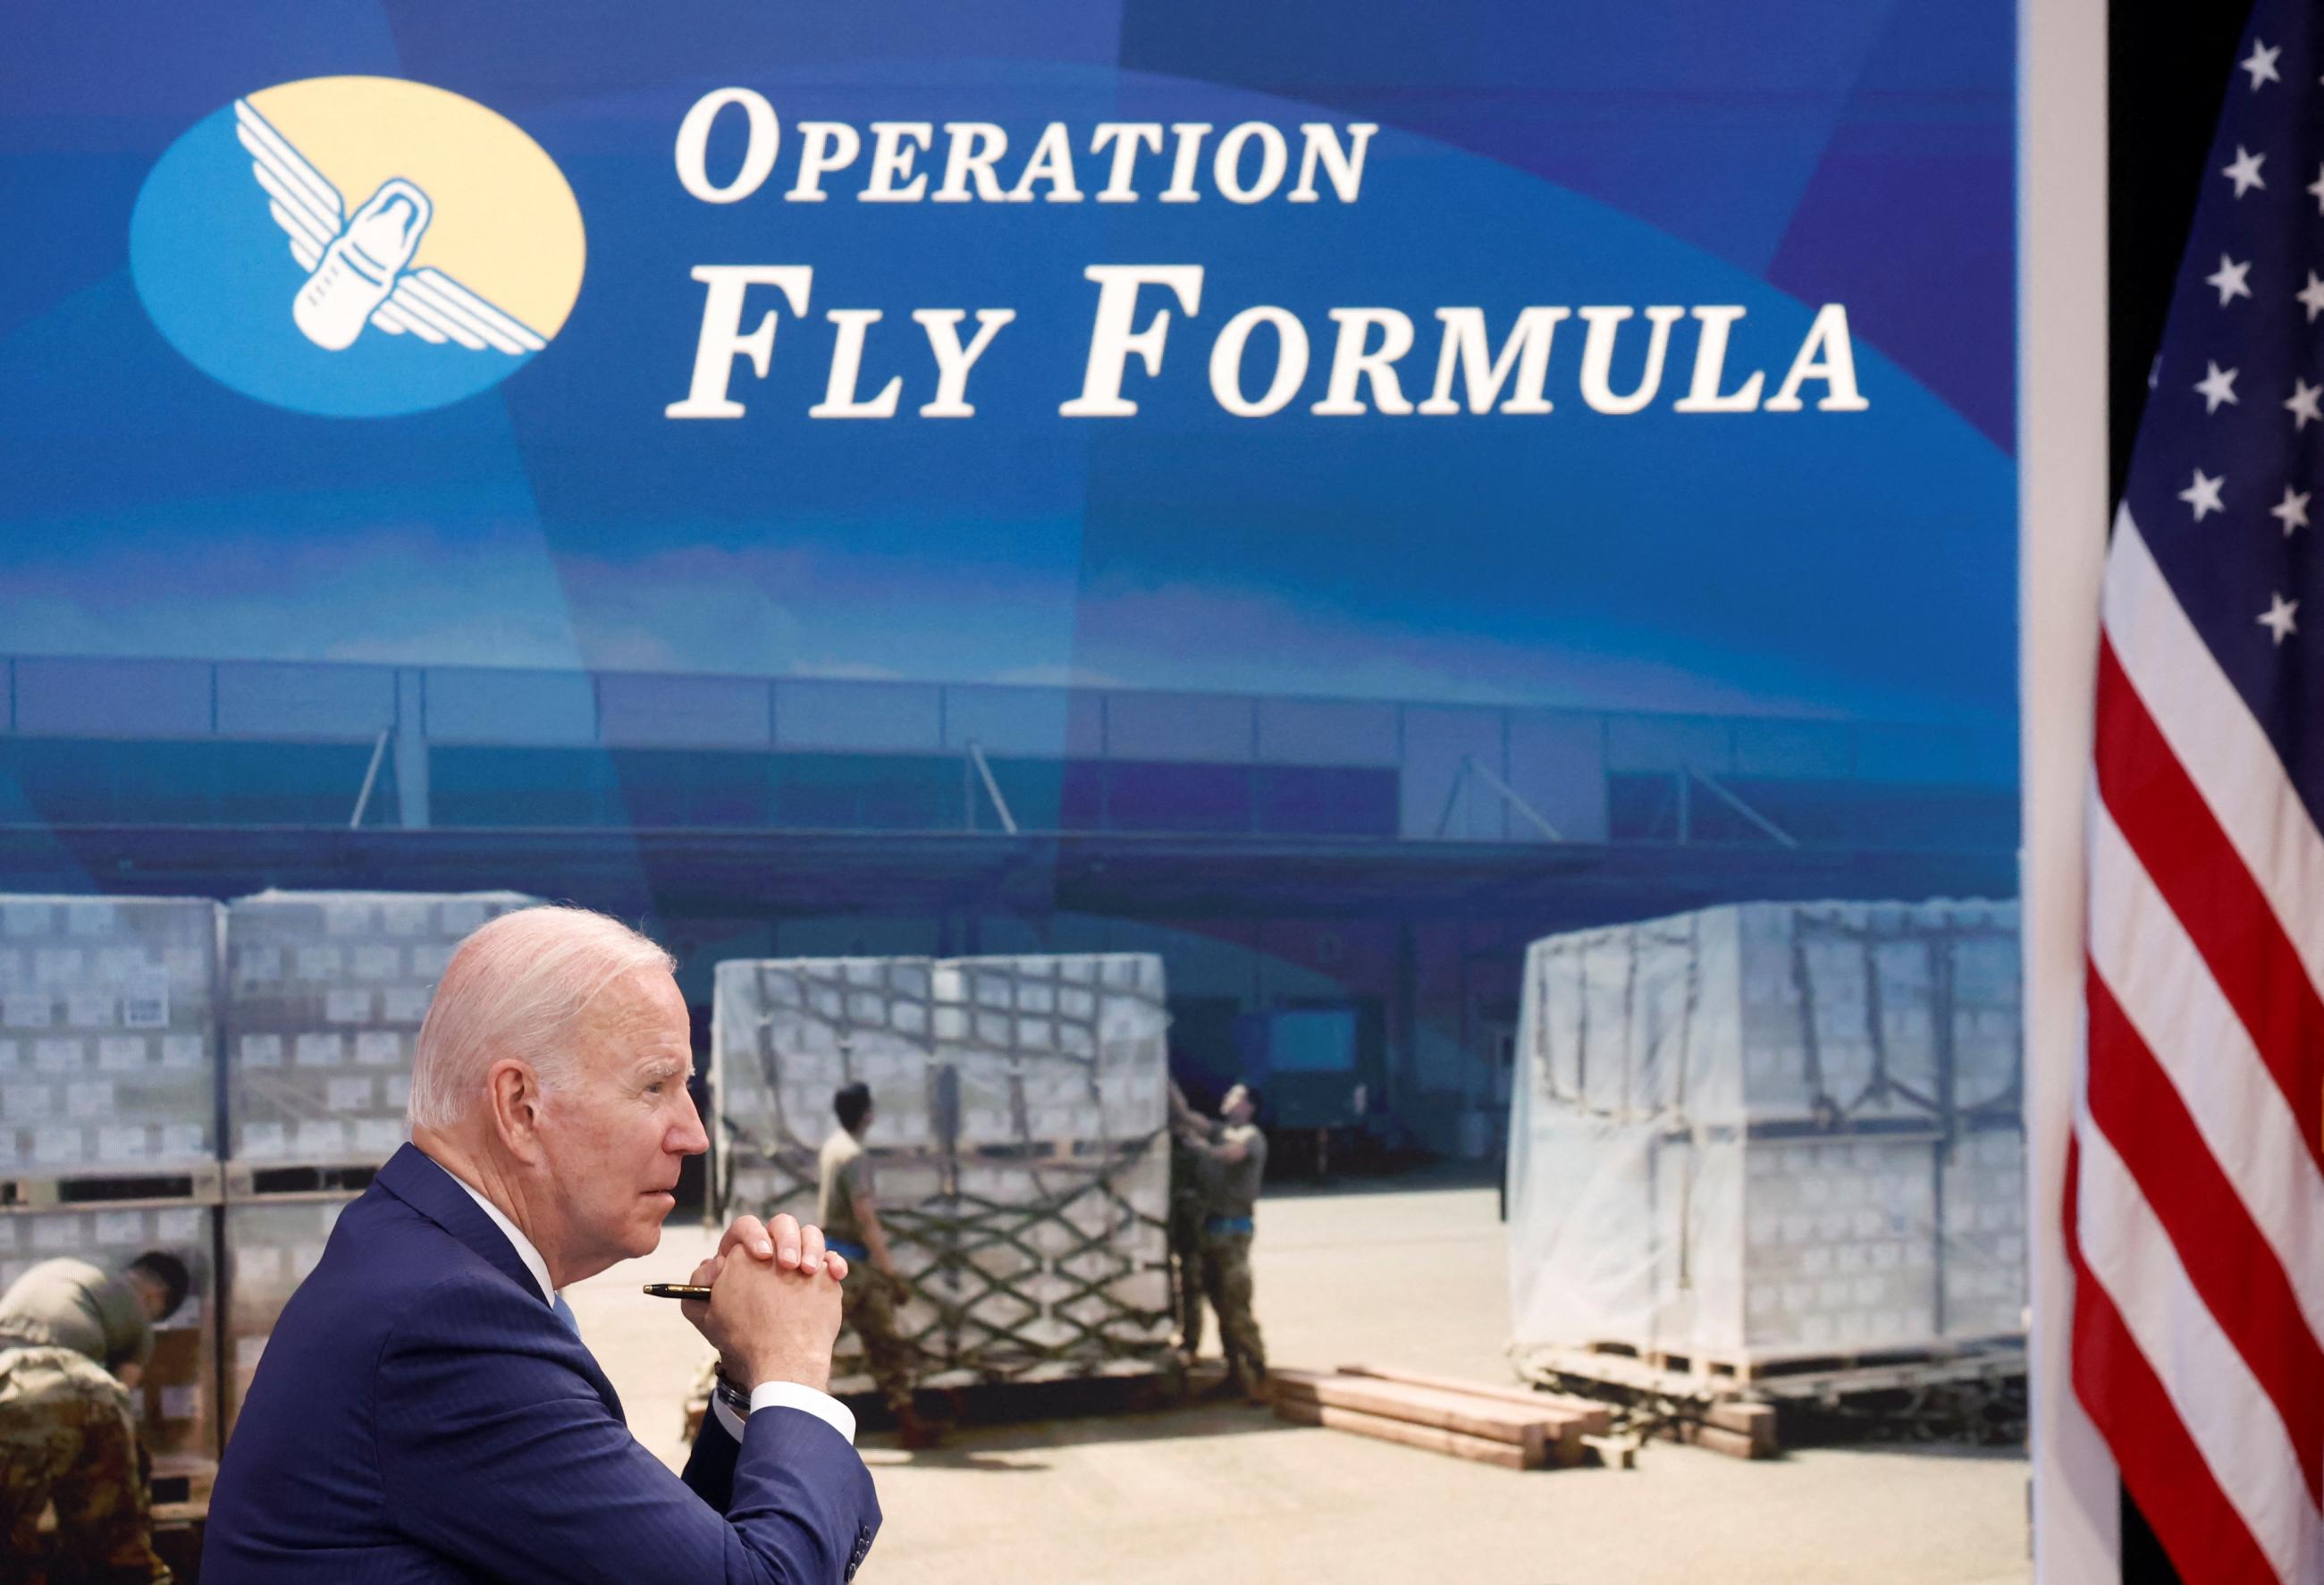 President Joe Biden sits, looking pensive, facing an American flag. Behind him is a screen depicting U.S. soldiers unloading crates of formula beneath a sign that says "Operation Fly Formula" next to a blue and ivory logo of a baby bottle with wings. 